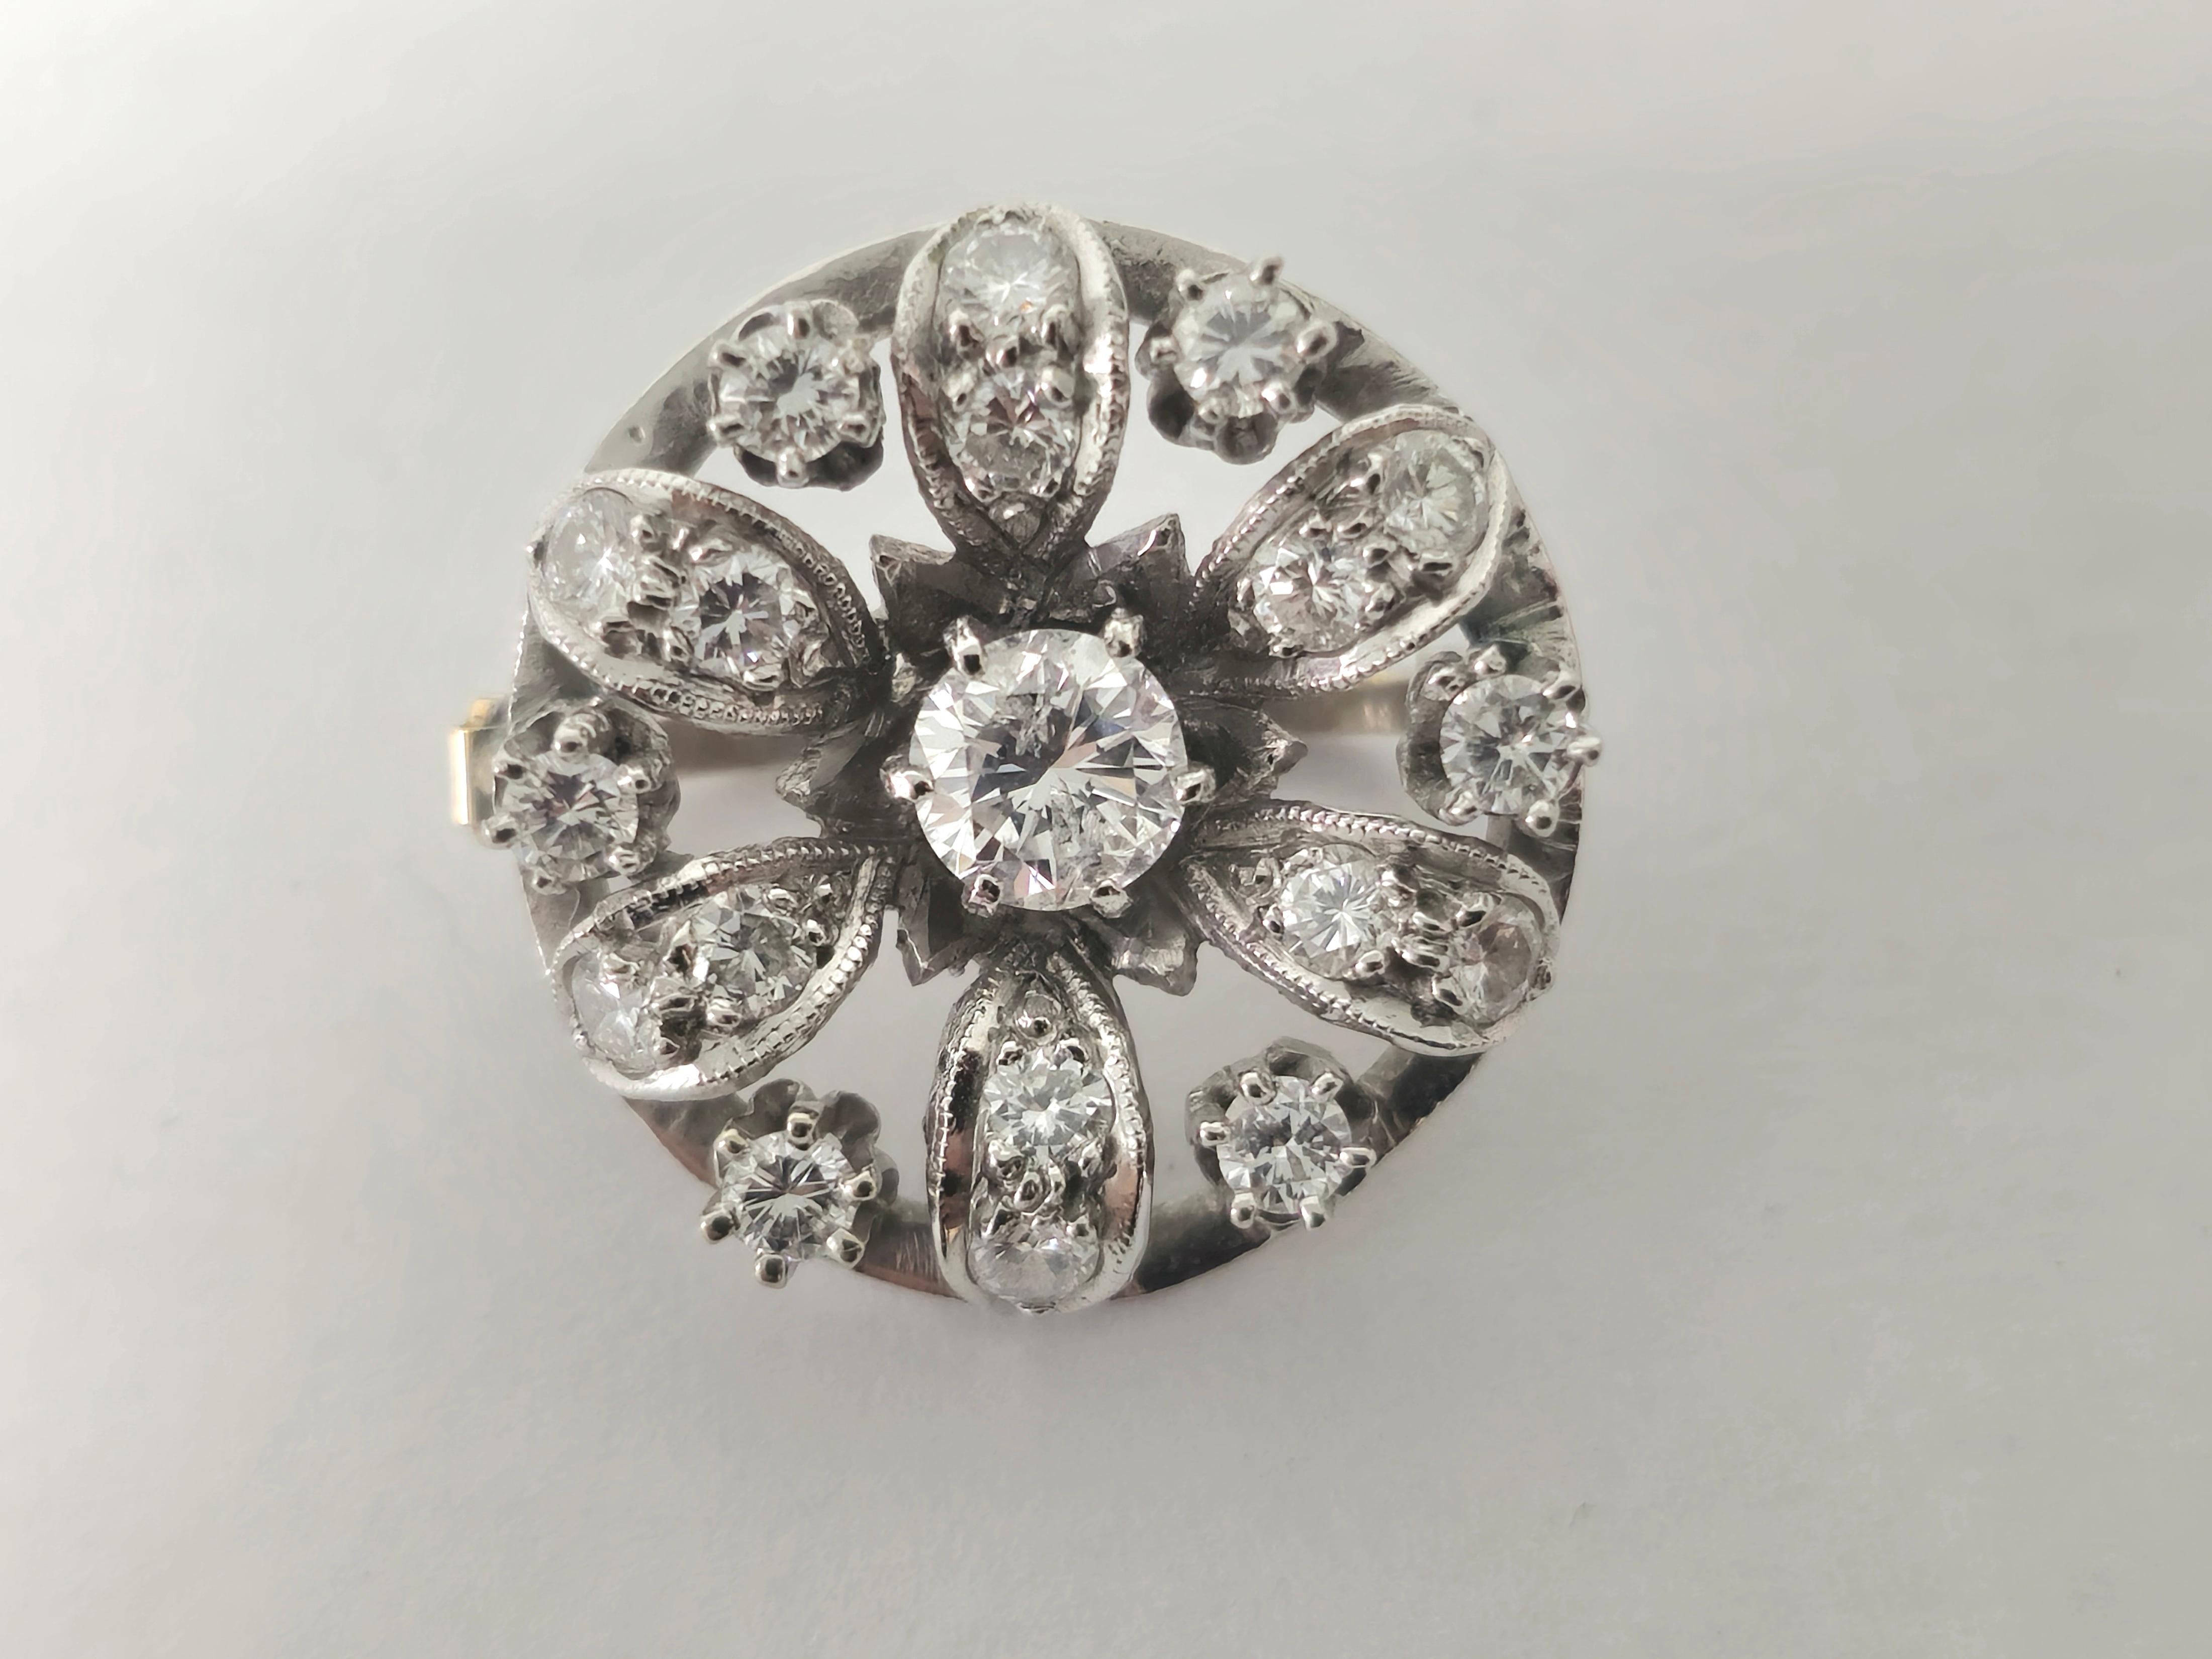 This vintage platinum pin exudes timeless elegance and sophistication. Adorned with a captivating center diamond weighing 0.50 carats and surrounded by 1.25 carats of dazzling diamonds on the sides, this piece showcases the exquisite craftsmanship